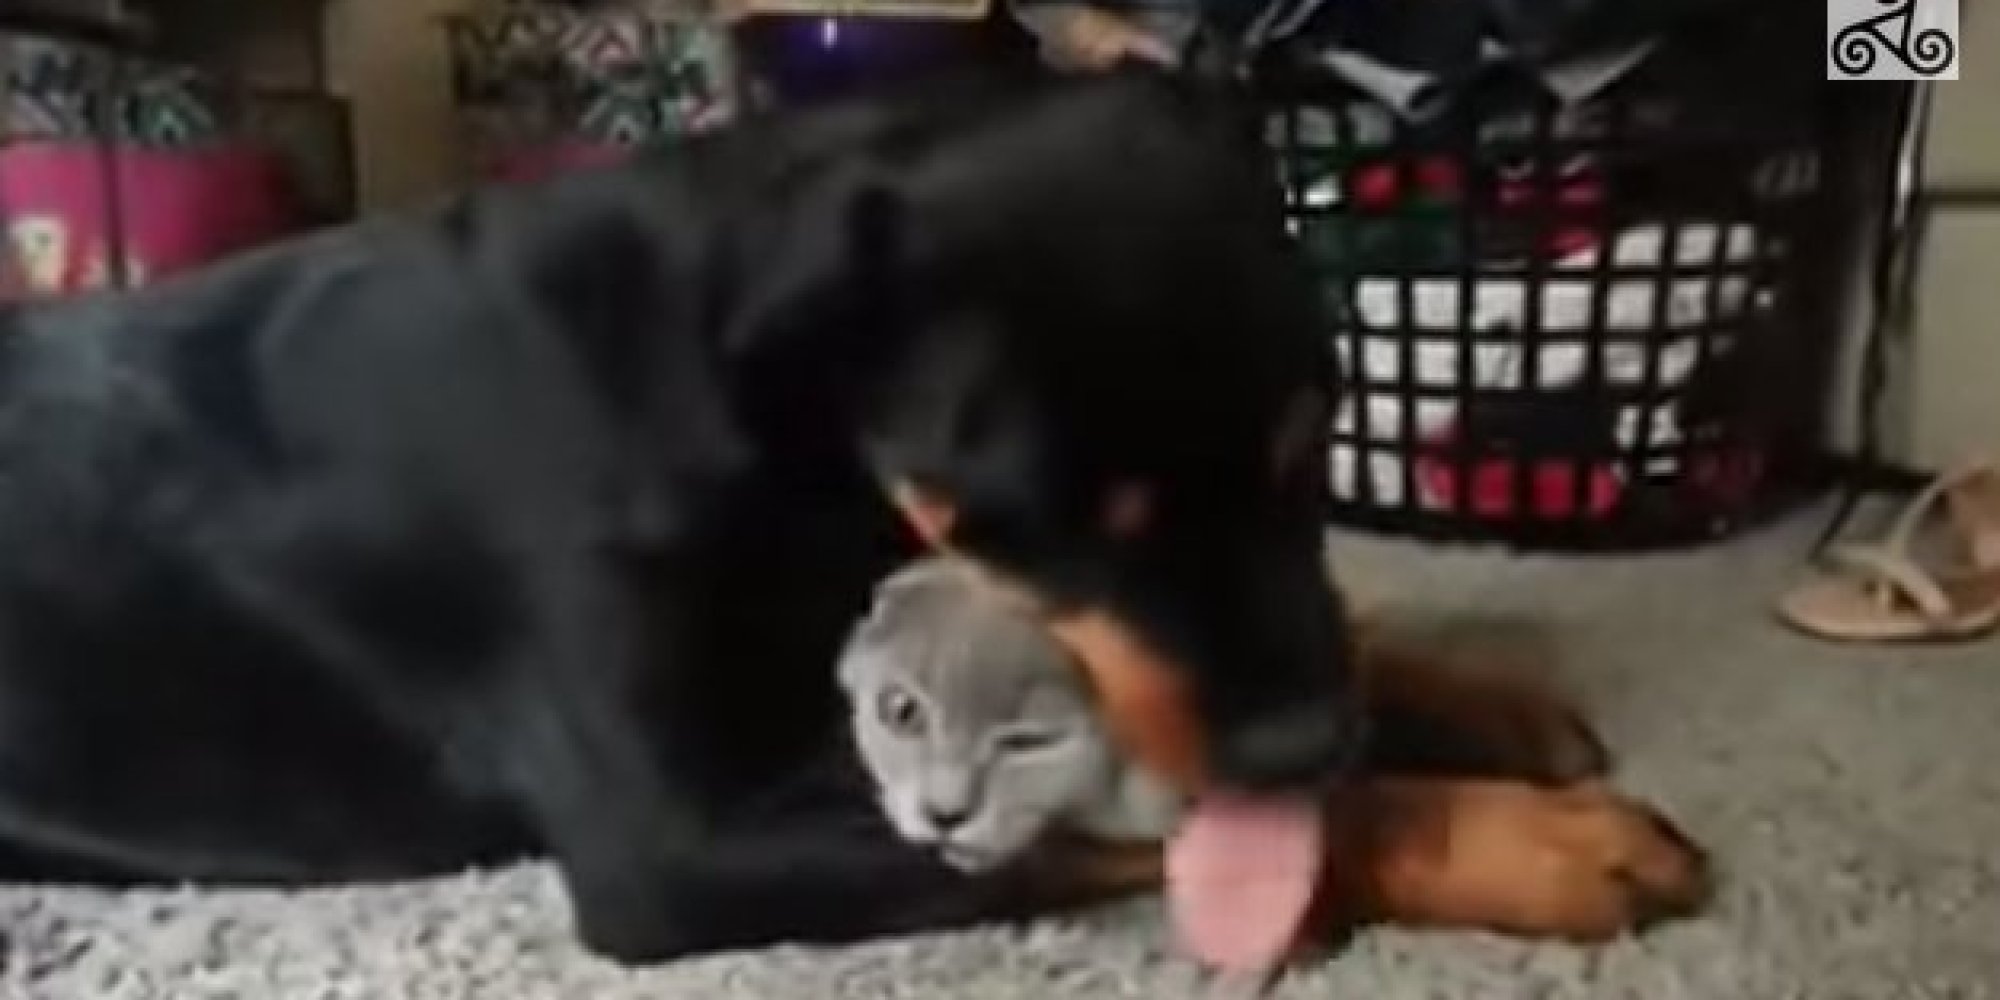 VIDEO: Ahh WATCH! Dog Loves His Cat Friend!